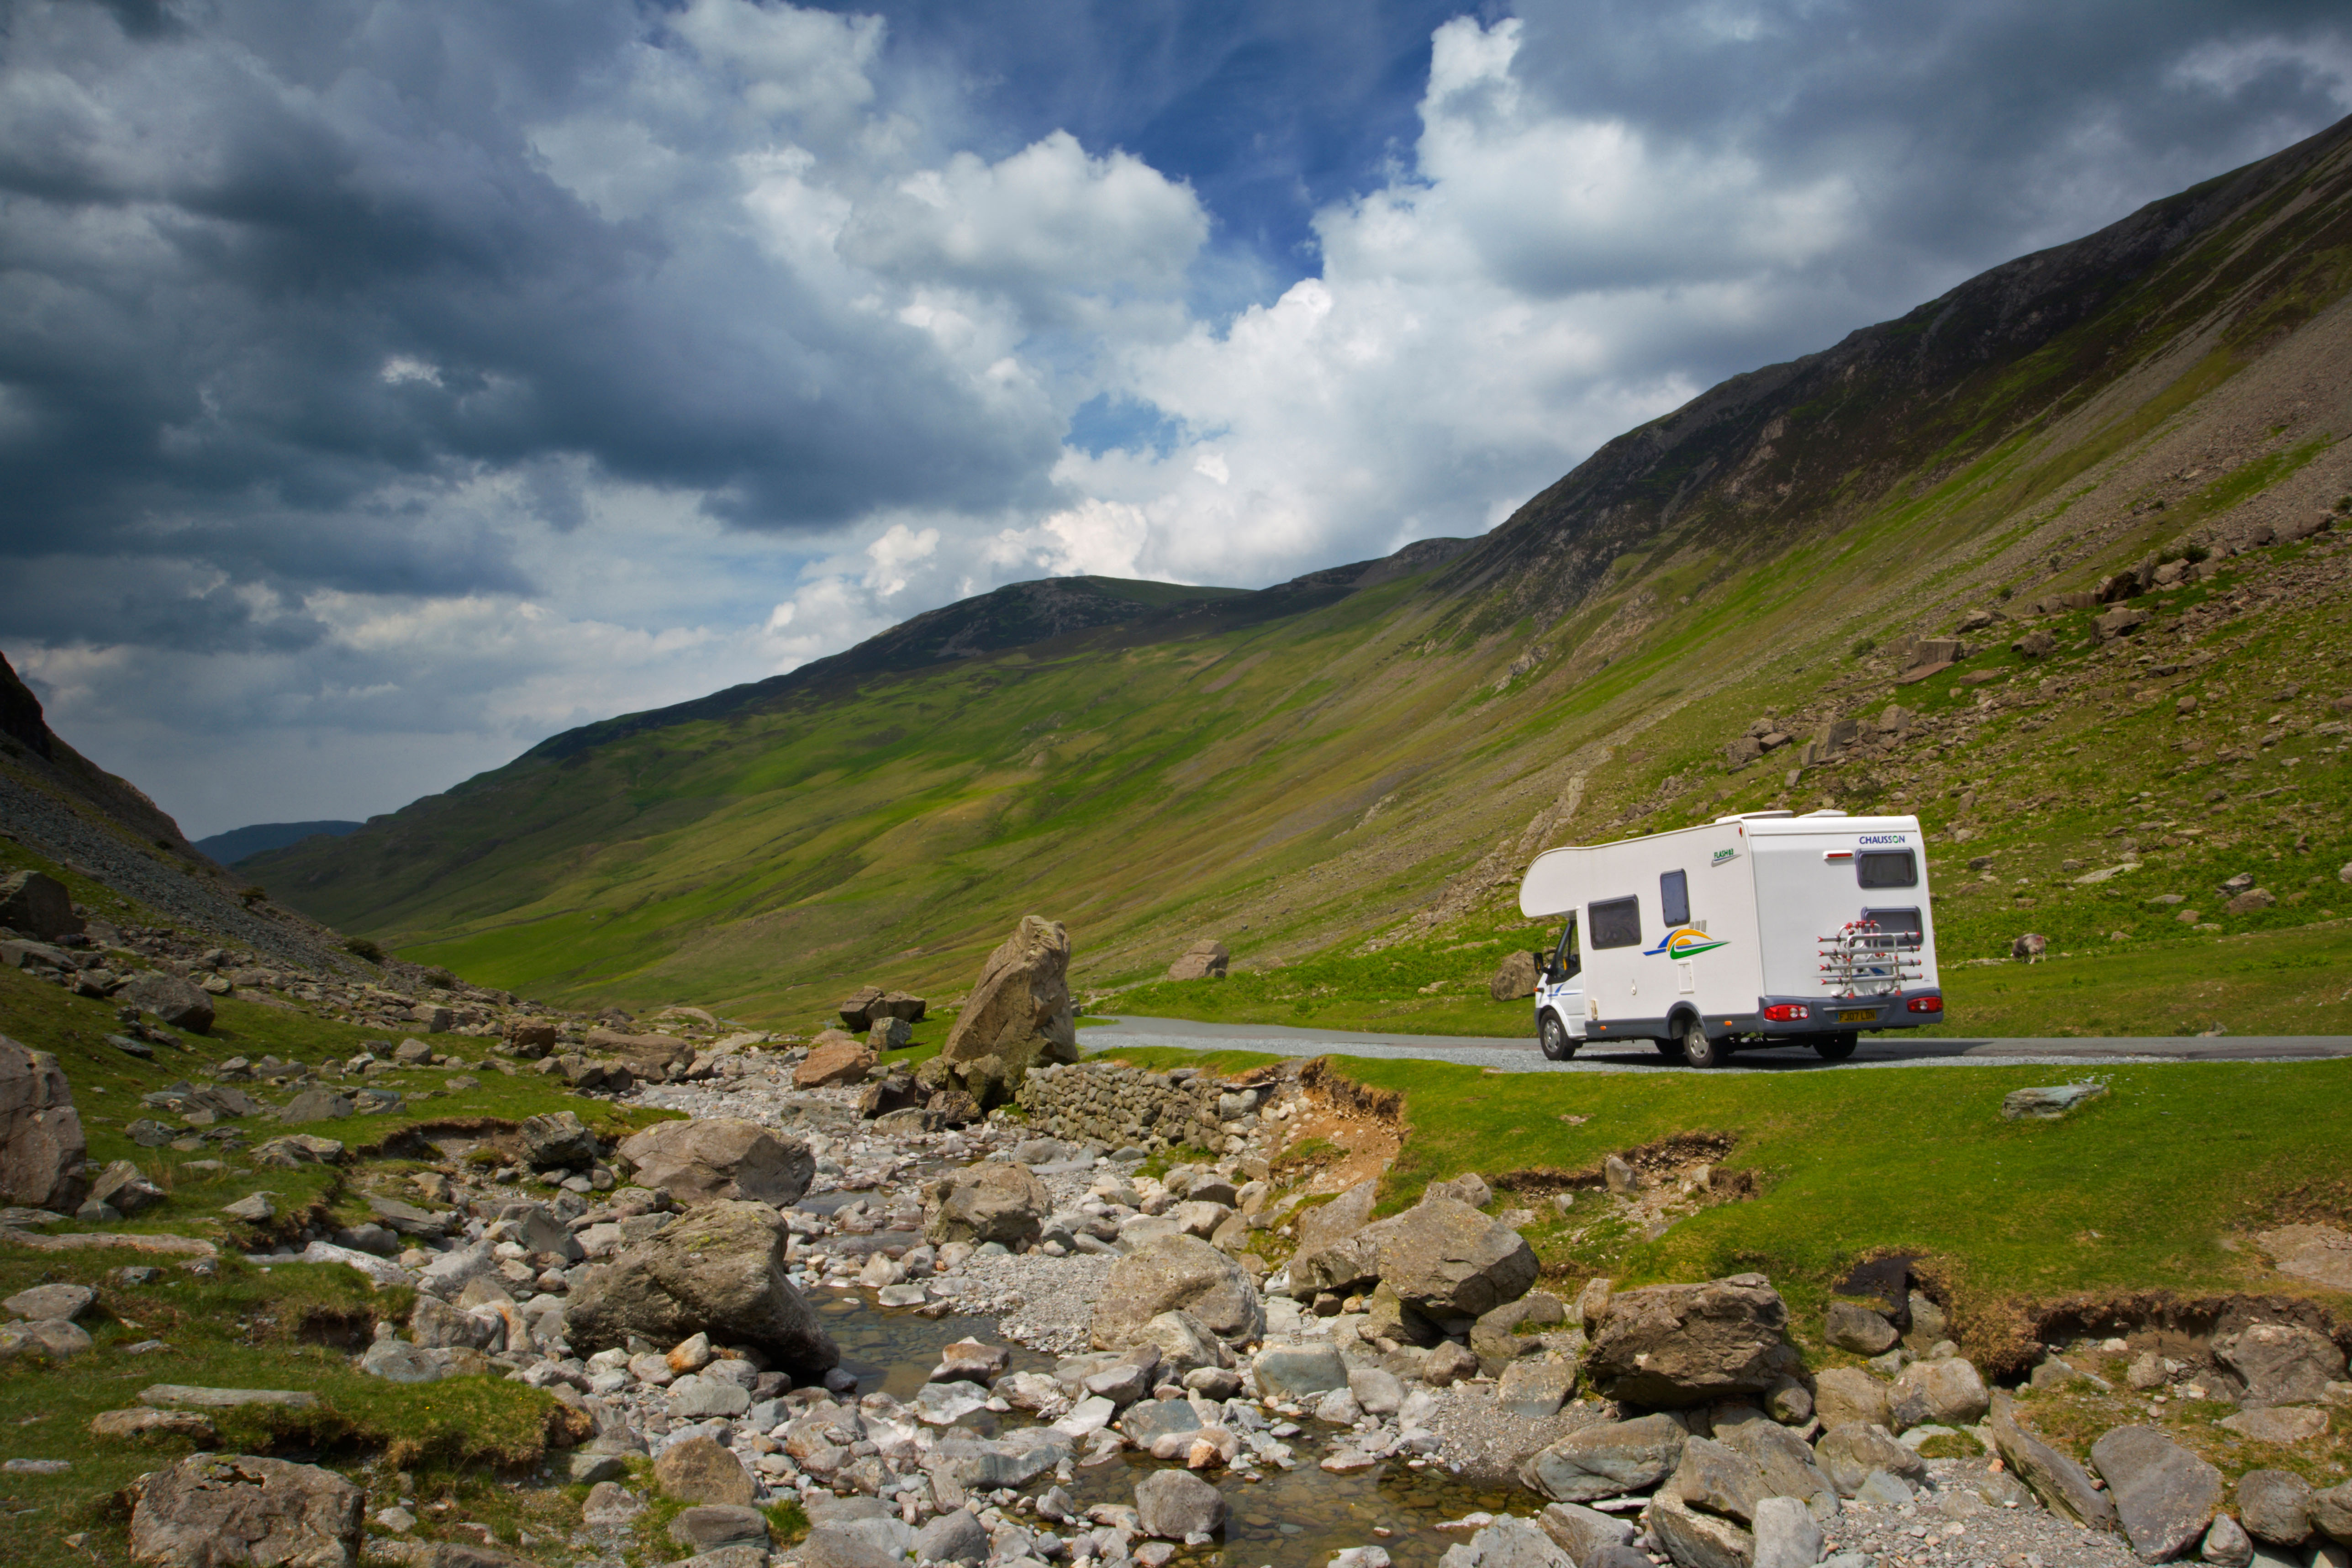 A driver stops to take in the view at the Honister Pass in the Lake District